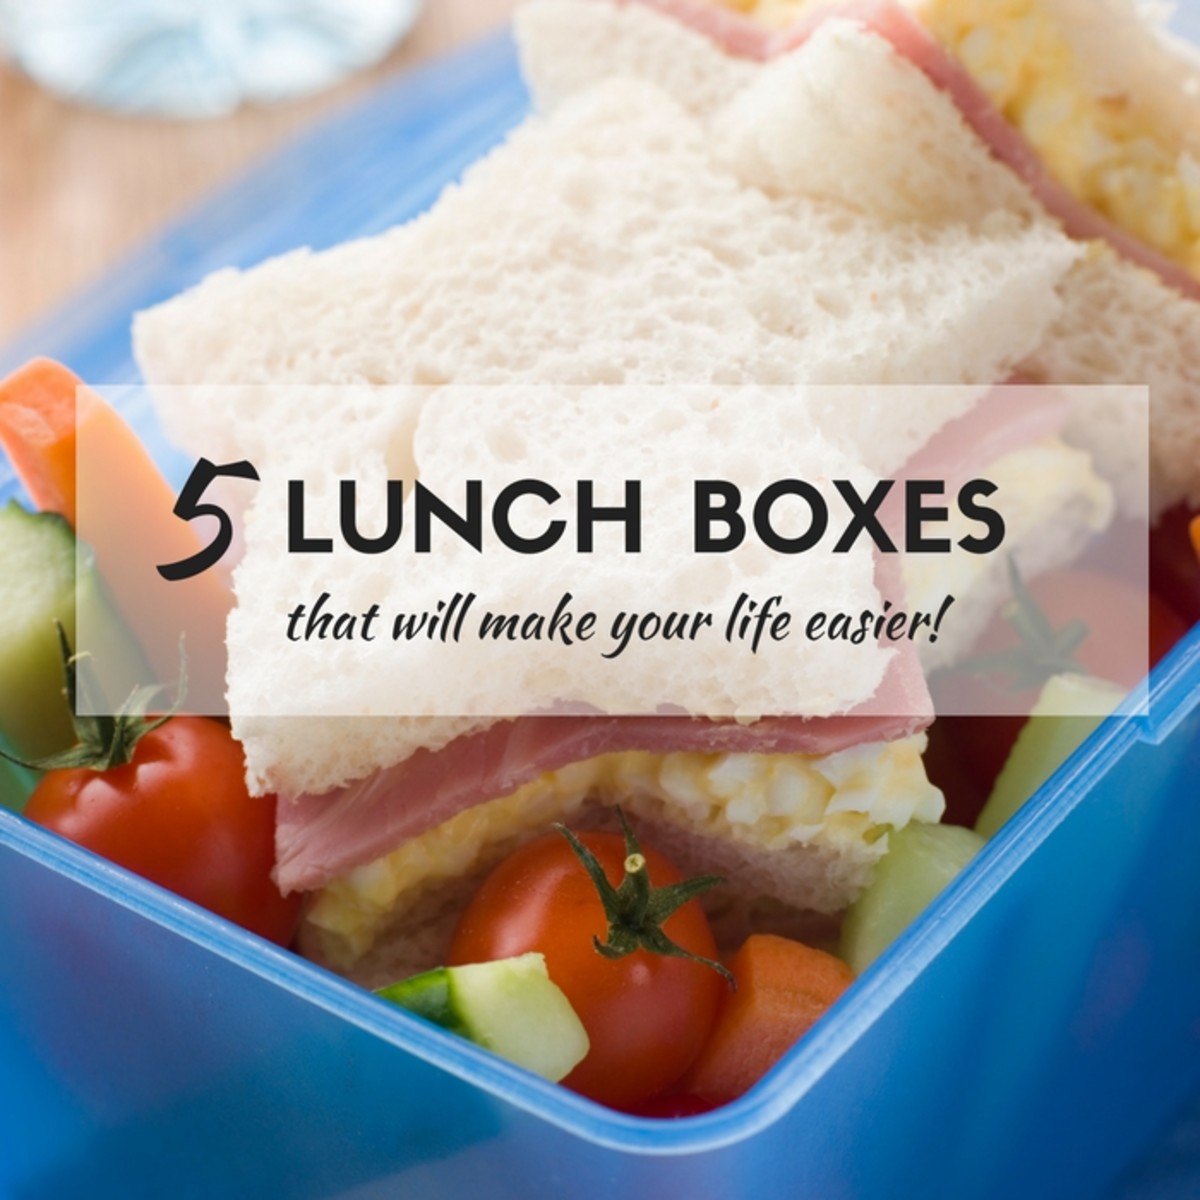 5 Lunch Boxes to Make Your Life Easier - MomTrendsMomTrends